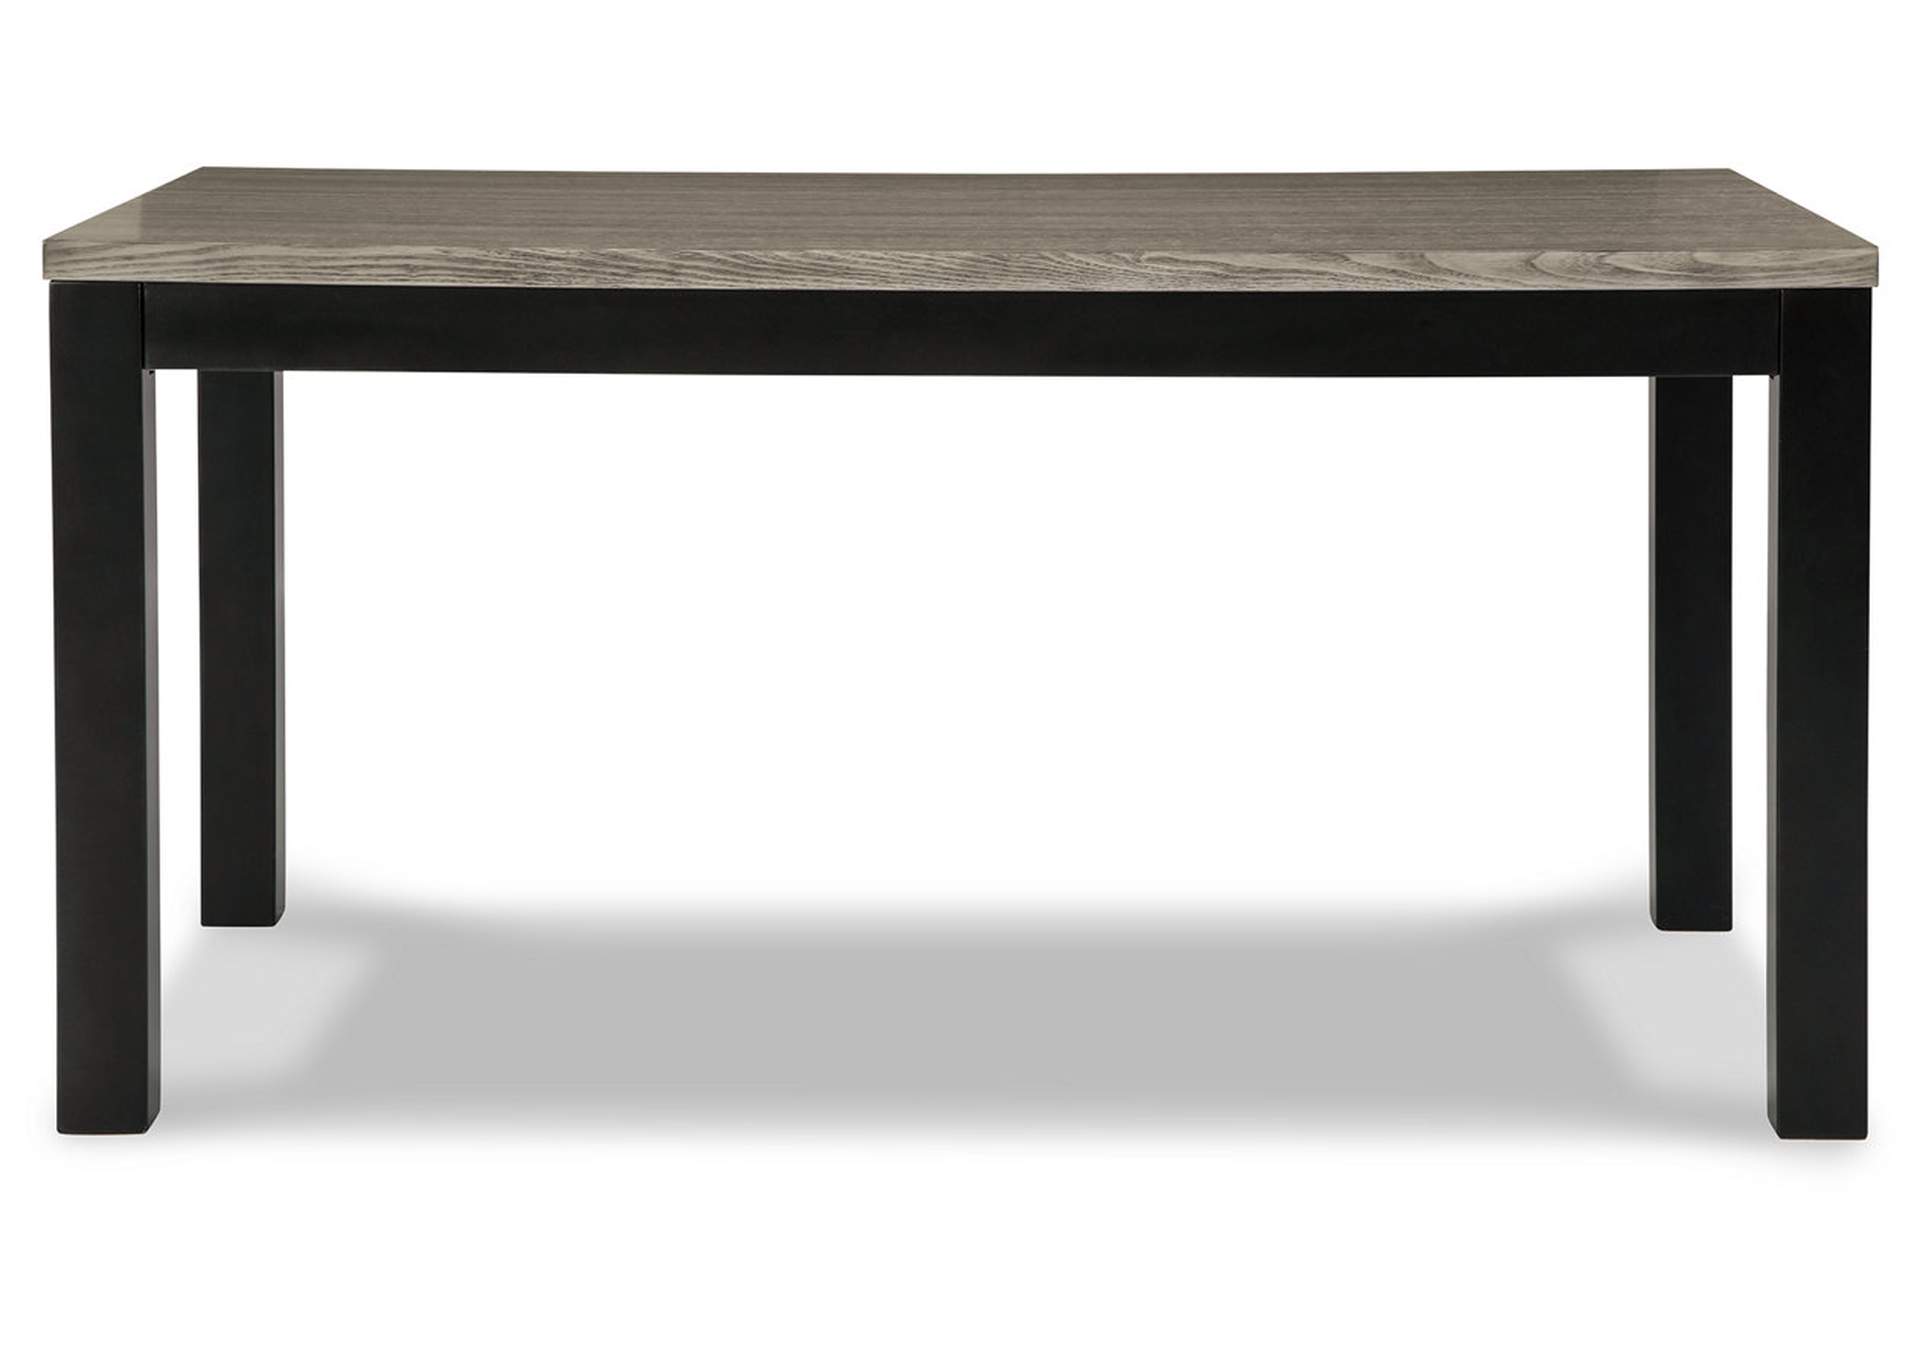 Dontally Dining Table,Benchcraft